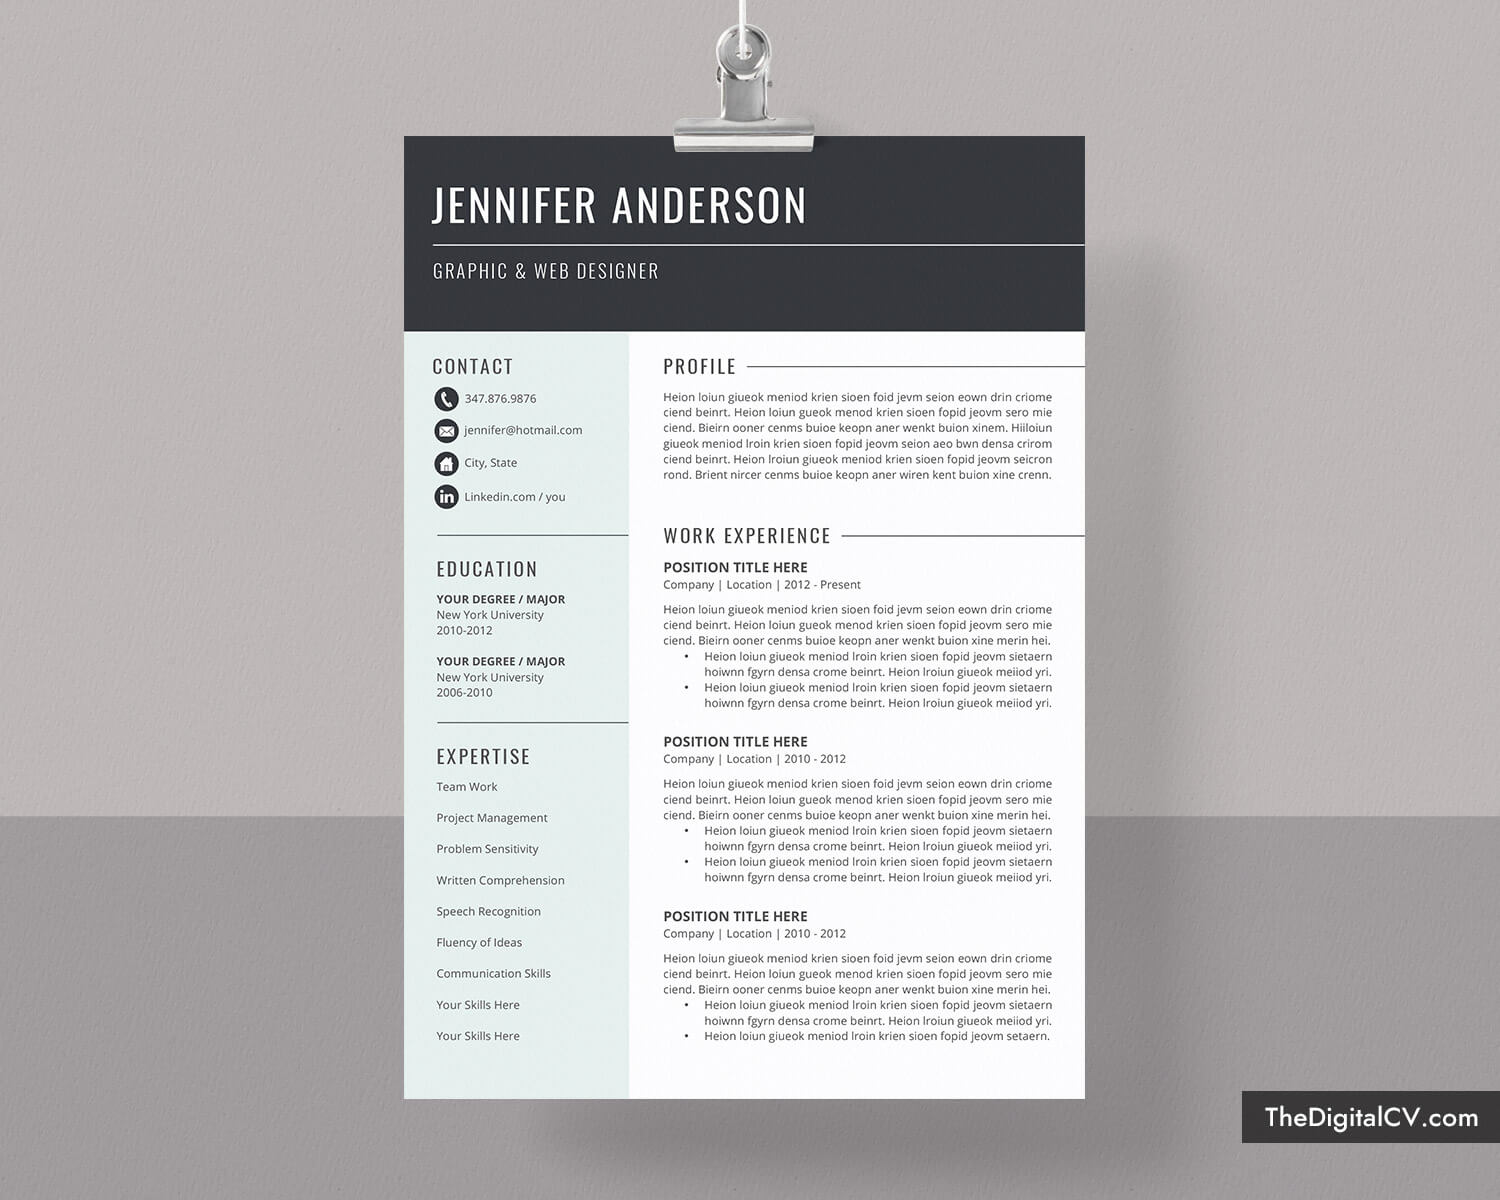 Basic And Simple Resume Template 2019 2020, Cv Template, Cover Letter,  Microsoft Word Resume Template, 1 3 Page, Modern Resume, Creative Resume, Pertaining To Microsoft Word Resumes Templates